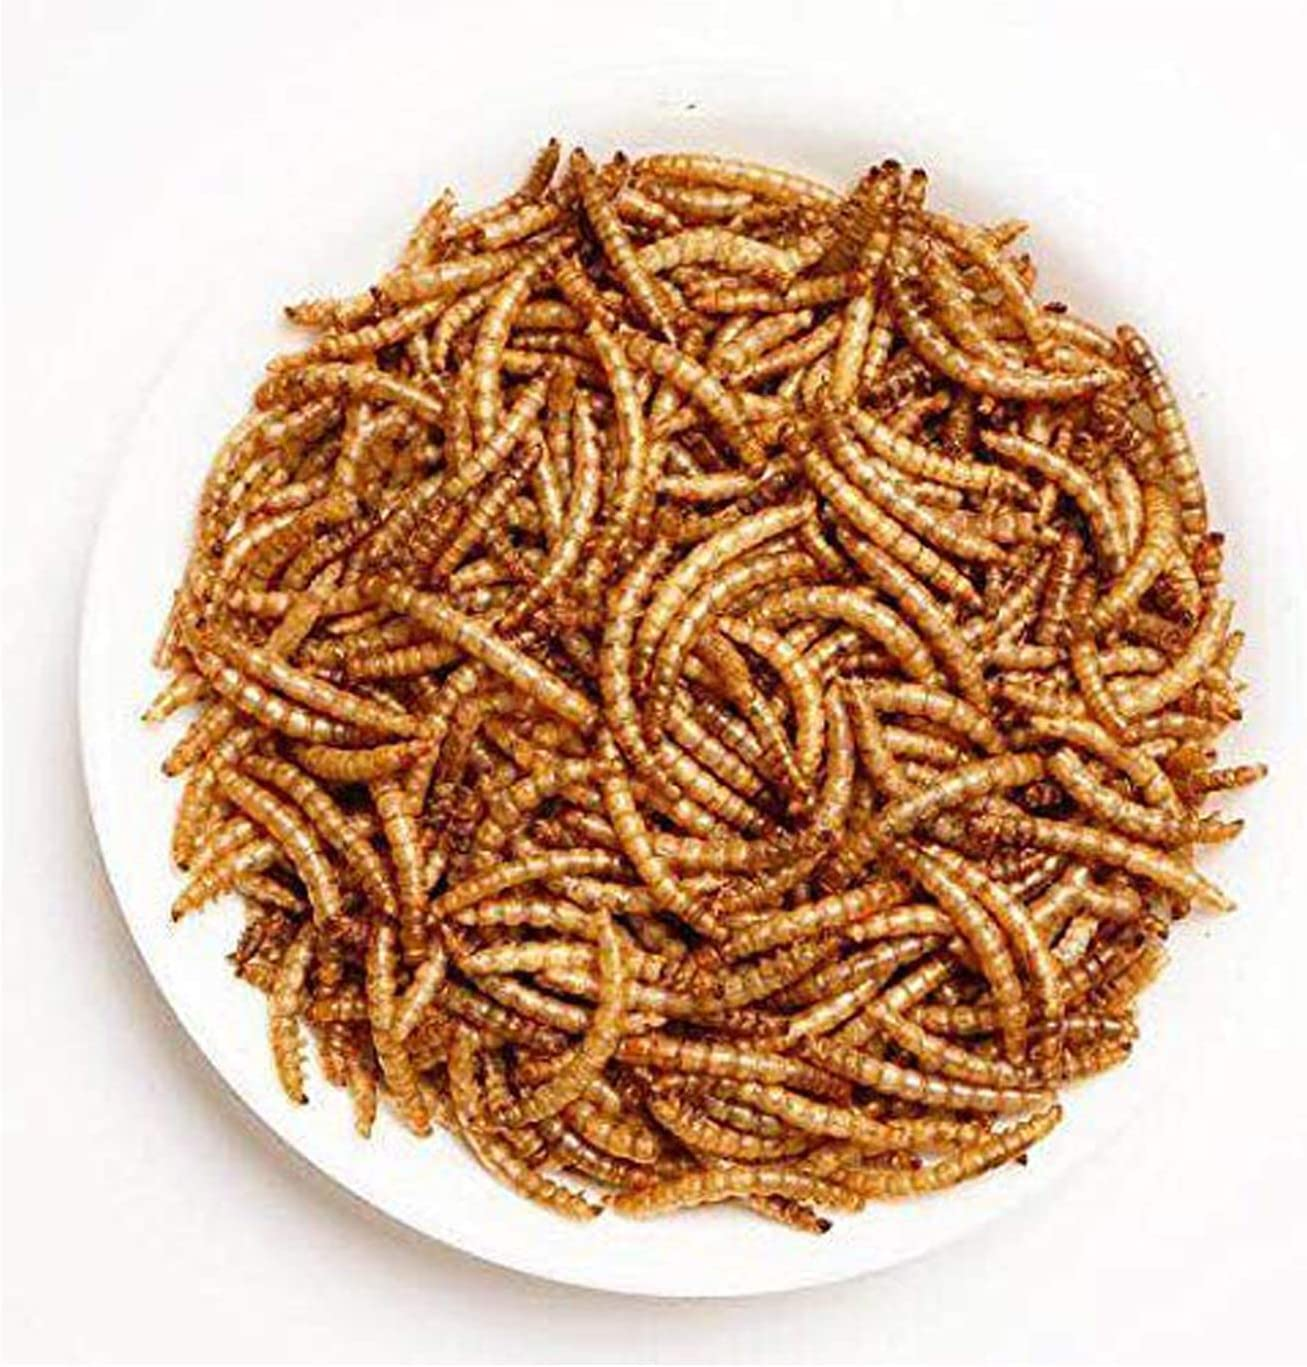 Mealworms -5 Lbs- 100% Non-Gmo Dried Mealworms - Large Meal Worms - Bulk Mealworms -High Protein Treats- Perfect Mealworm for Chickens, Ducks, Turtles, Blue Birds, Lizards - Bag of Mealworms 5 LBS